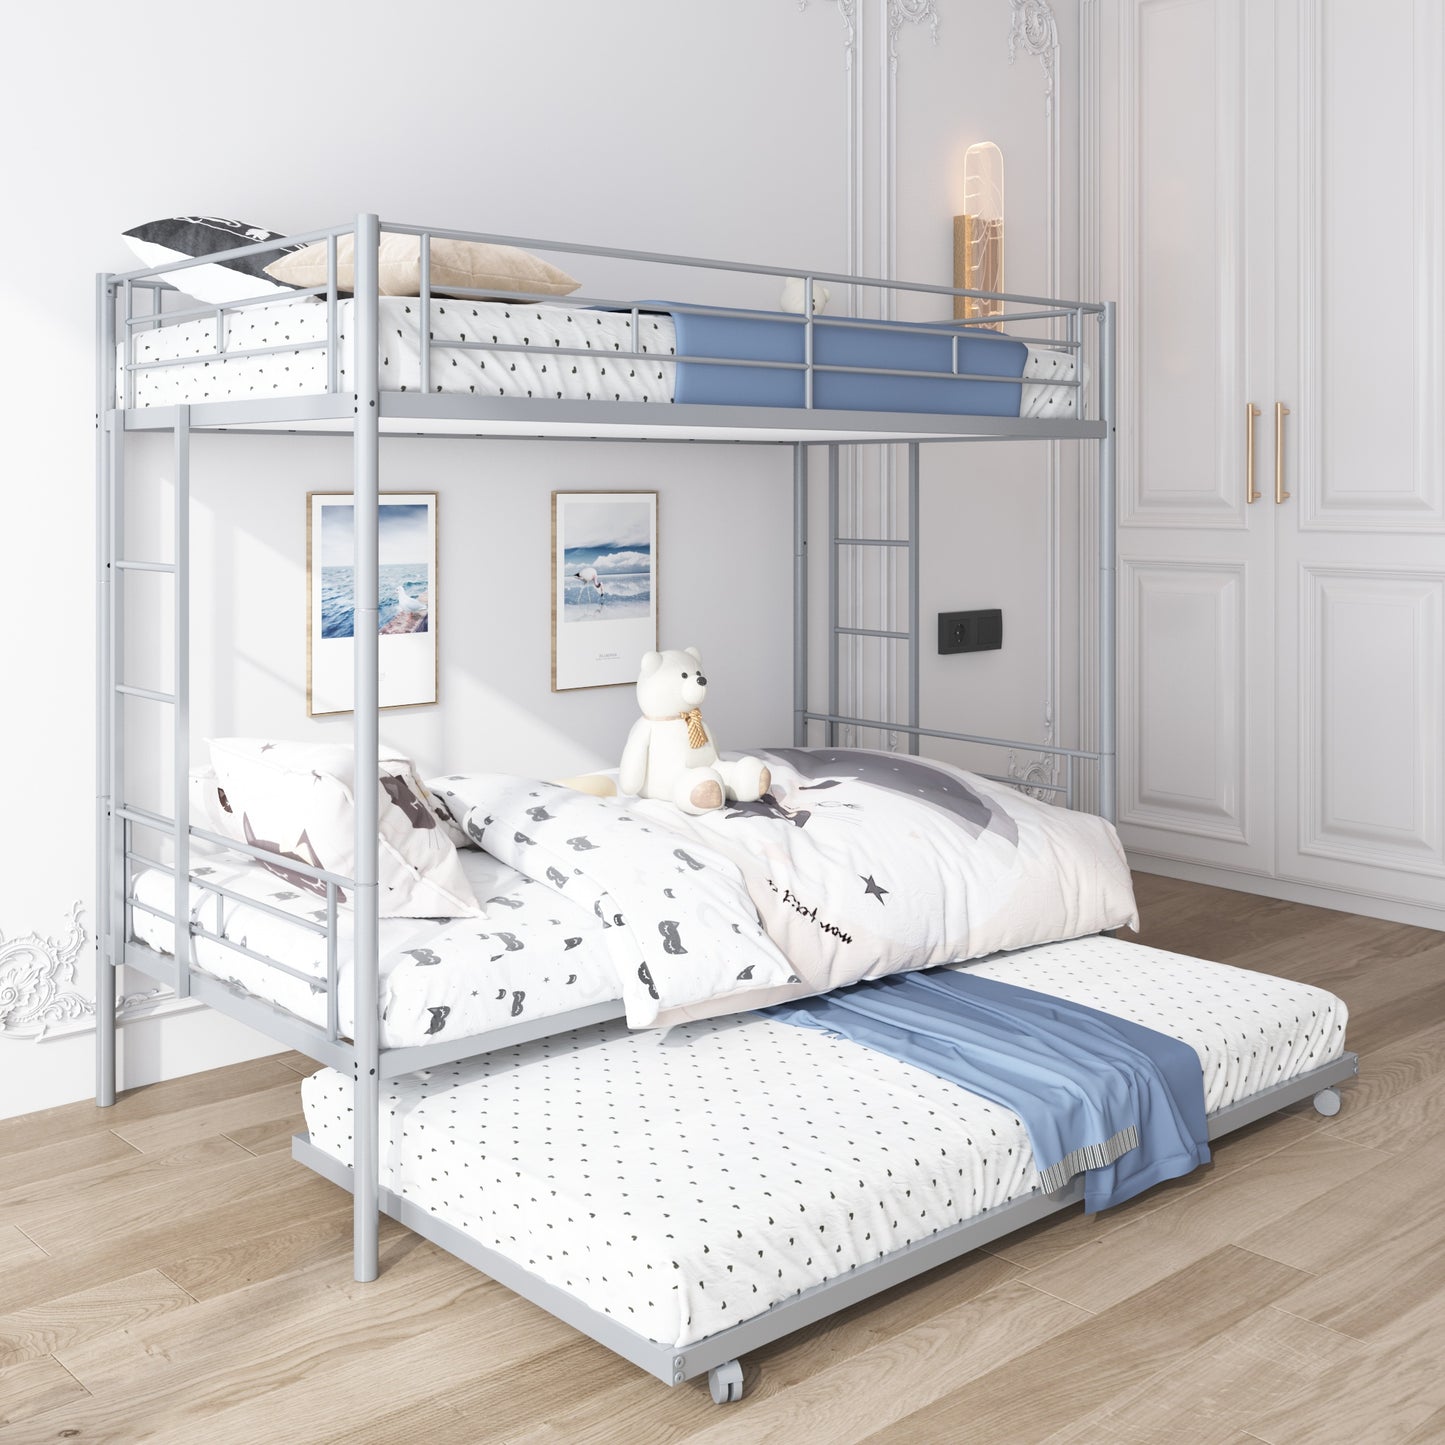 Twin Over Twin Metal Bunk Beds with Trundle, HSUNNS Convertible Bunk Beds Twin Size for Kids Adults, Bunk Bed Can Be Divided into 3 Beds, No Box Spring Needed, 350lbs Capacity, Silver